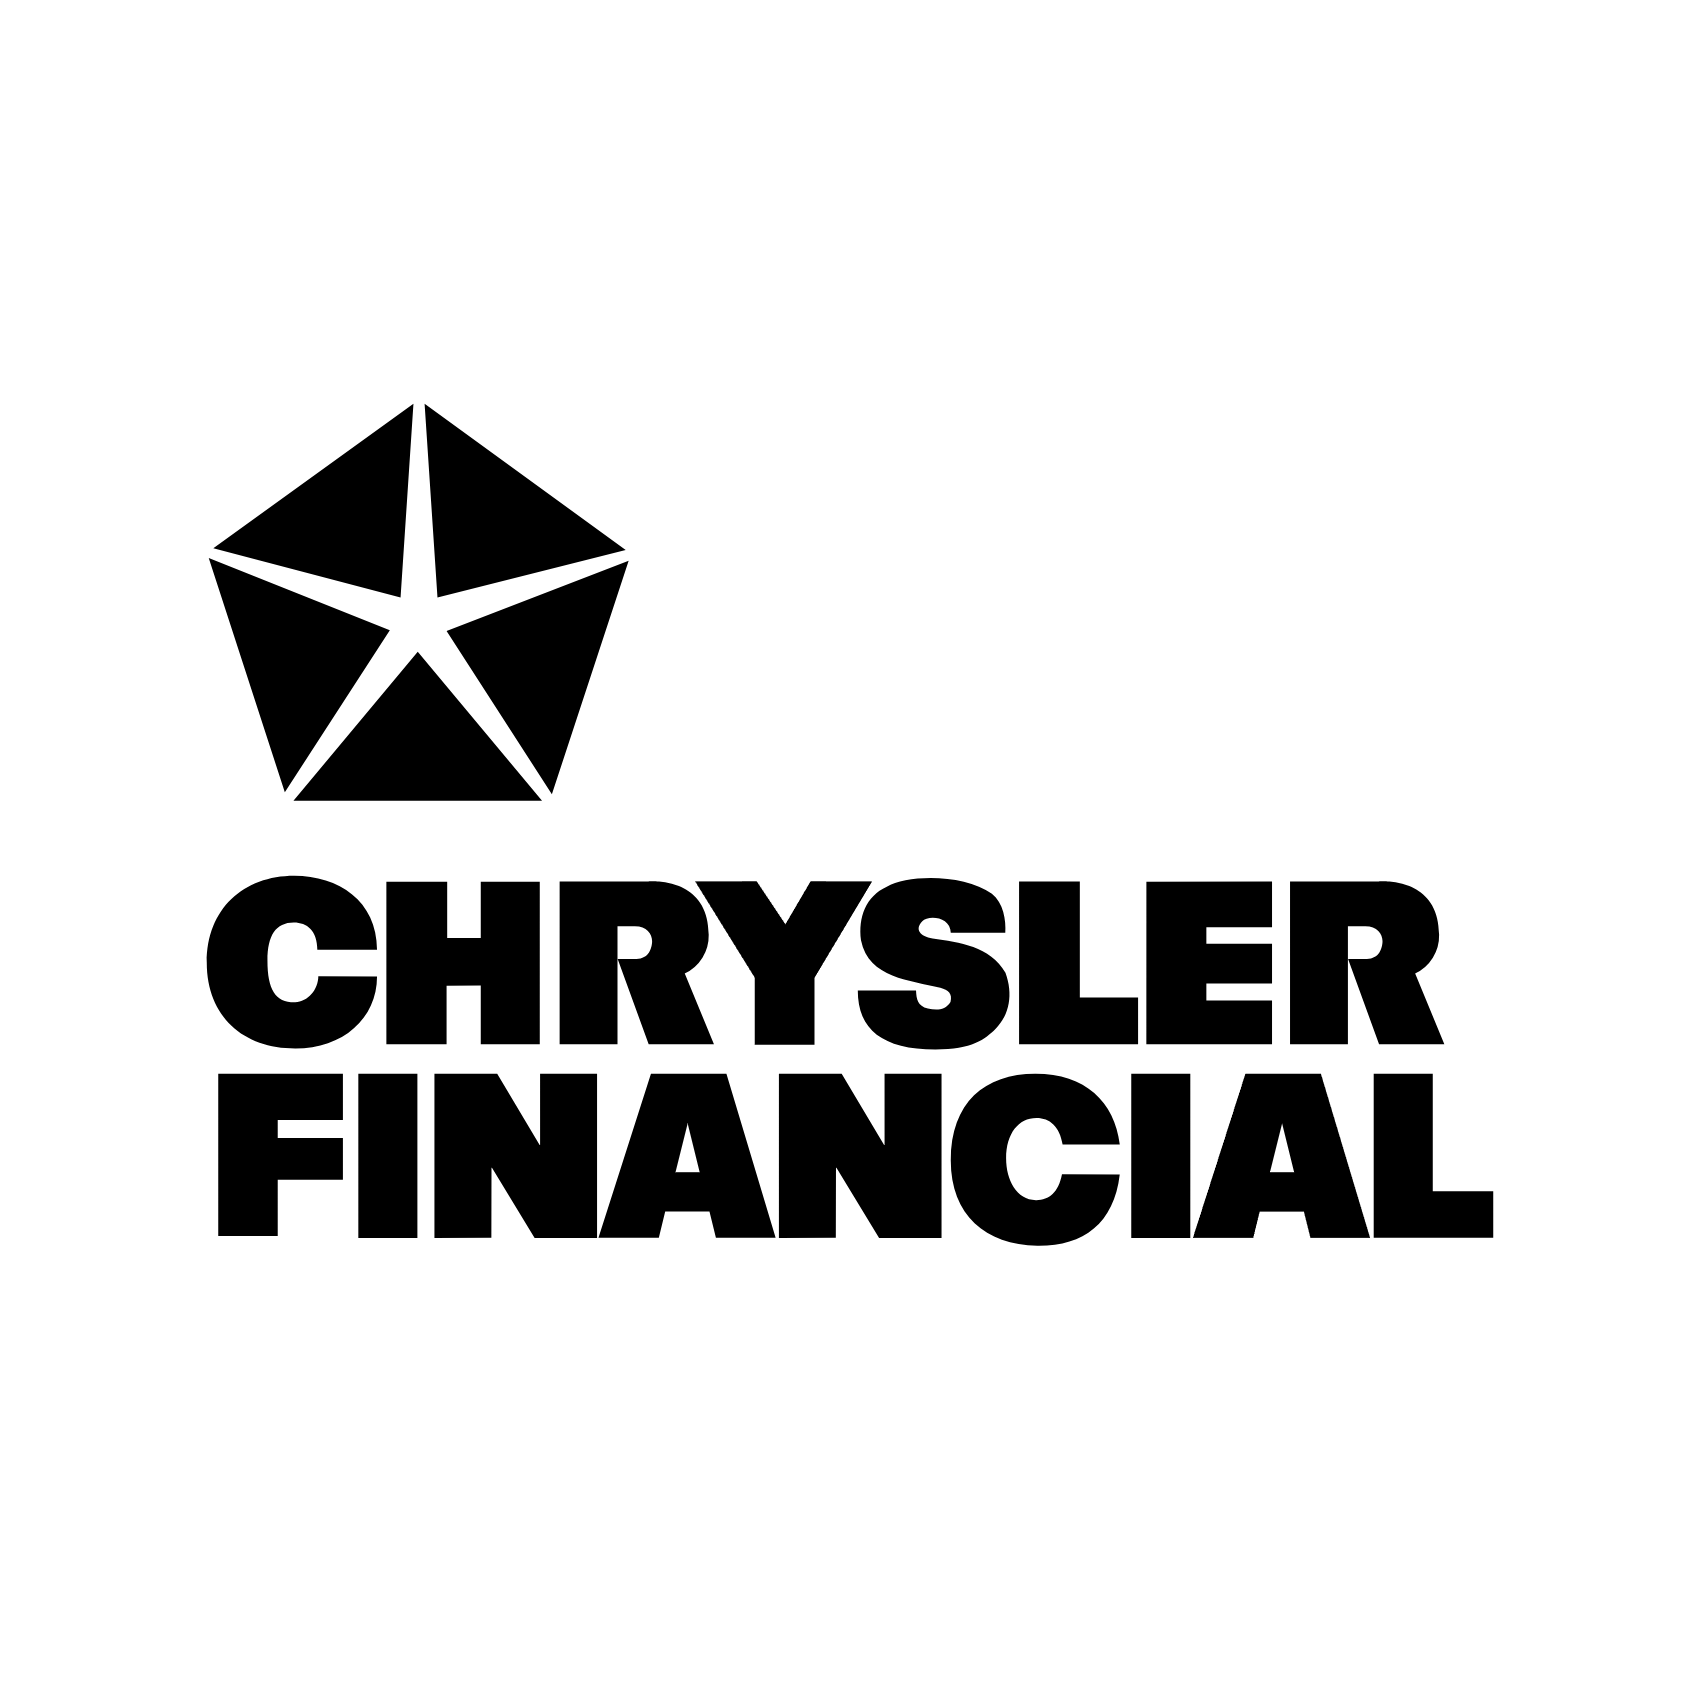 download-chrysler-financial-logo-png-and-vector-pdf-svg-ai-eps-free